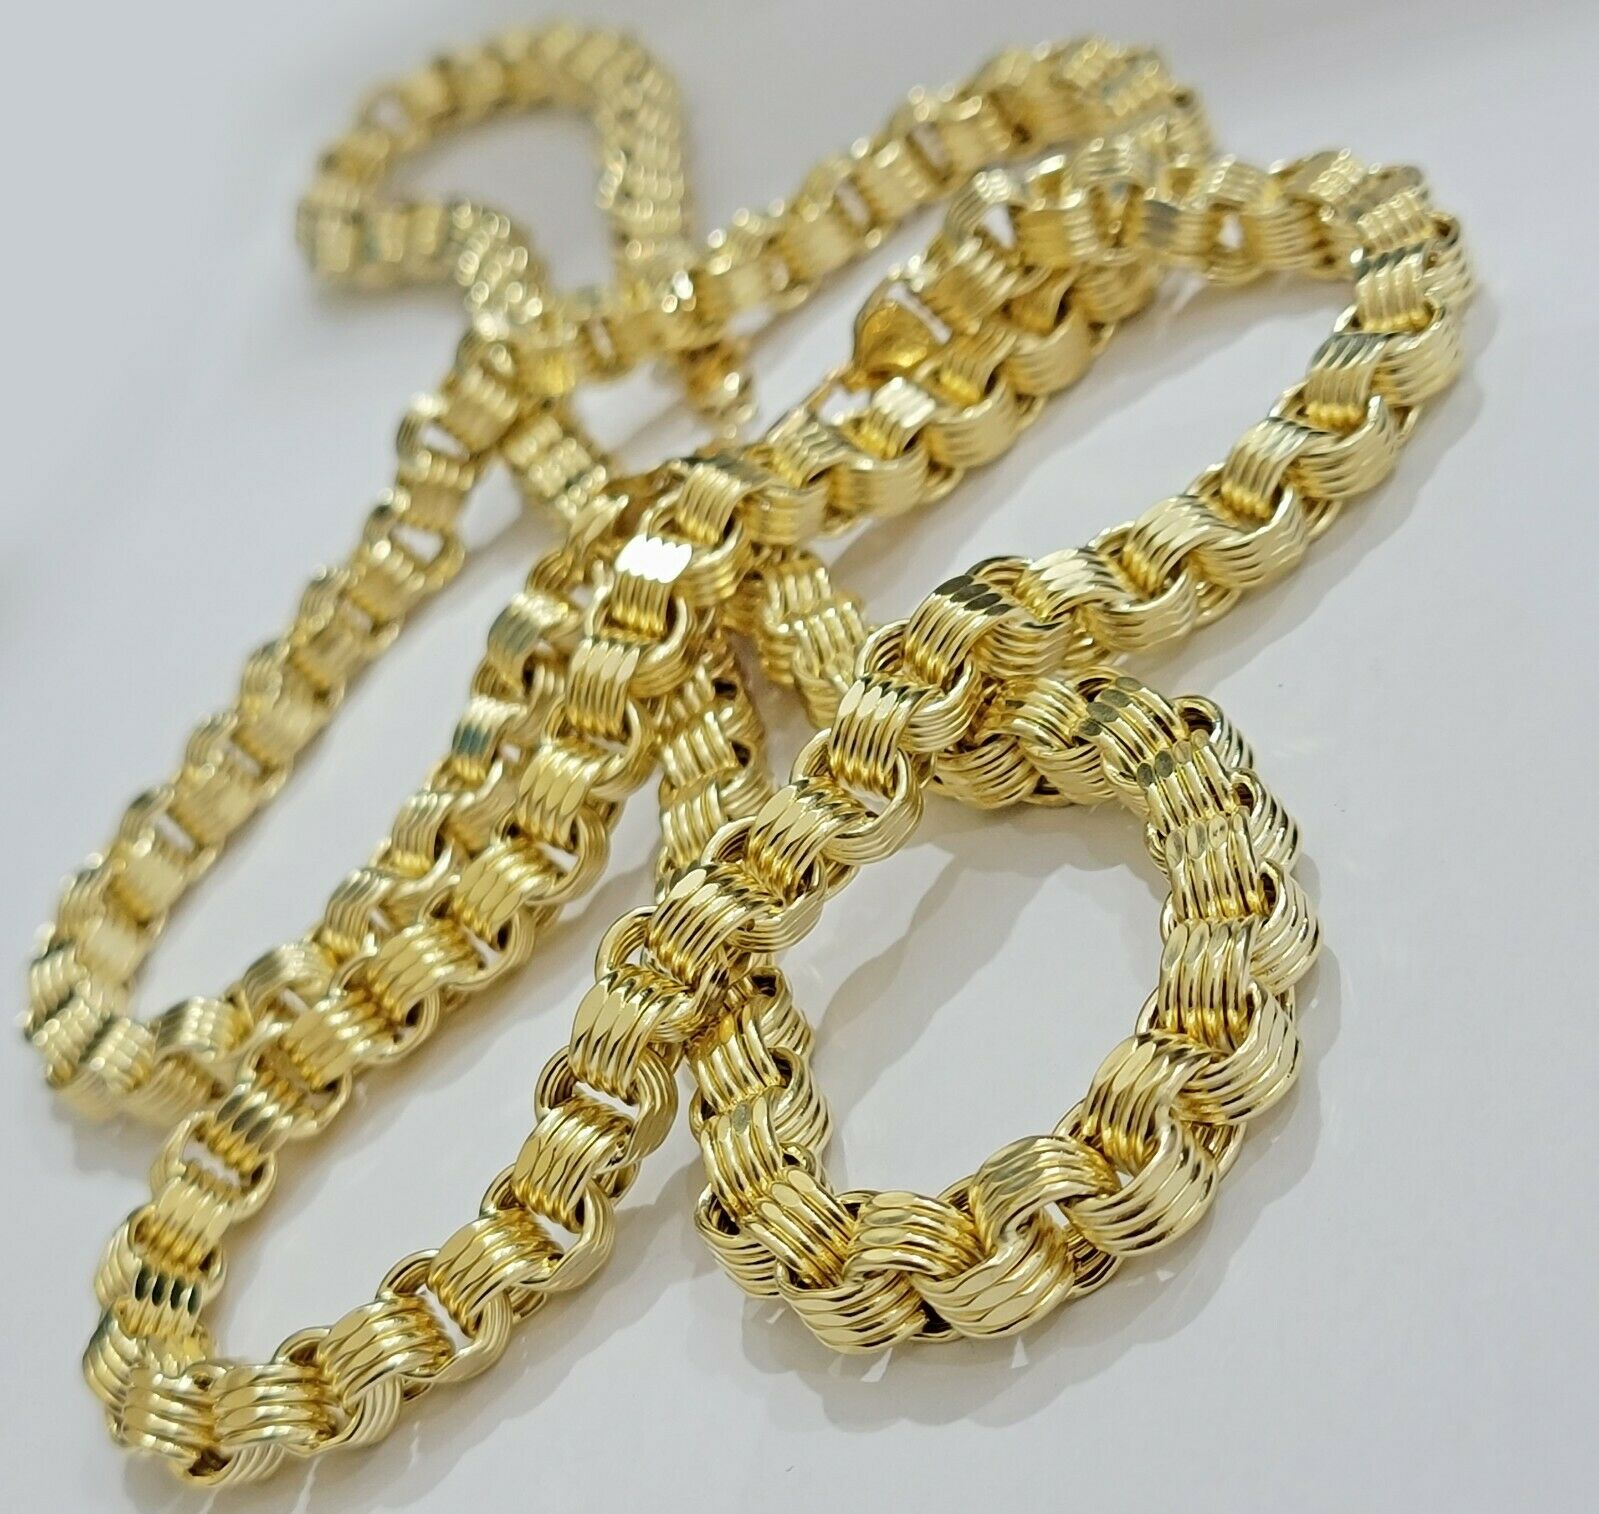 Real 10k Gold Byzantine Chain Necklace 8mm 30" Long 10kt Yellow Gold,Thick shiny